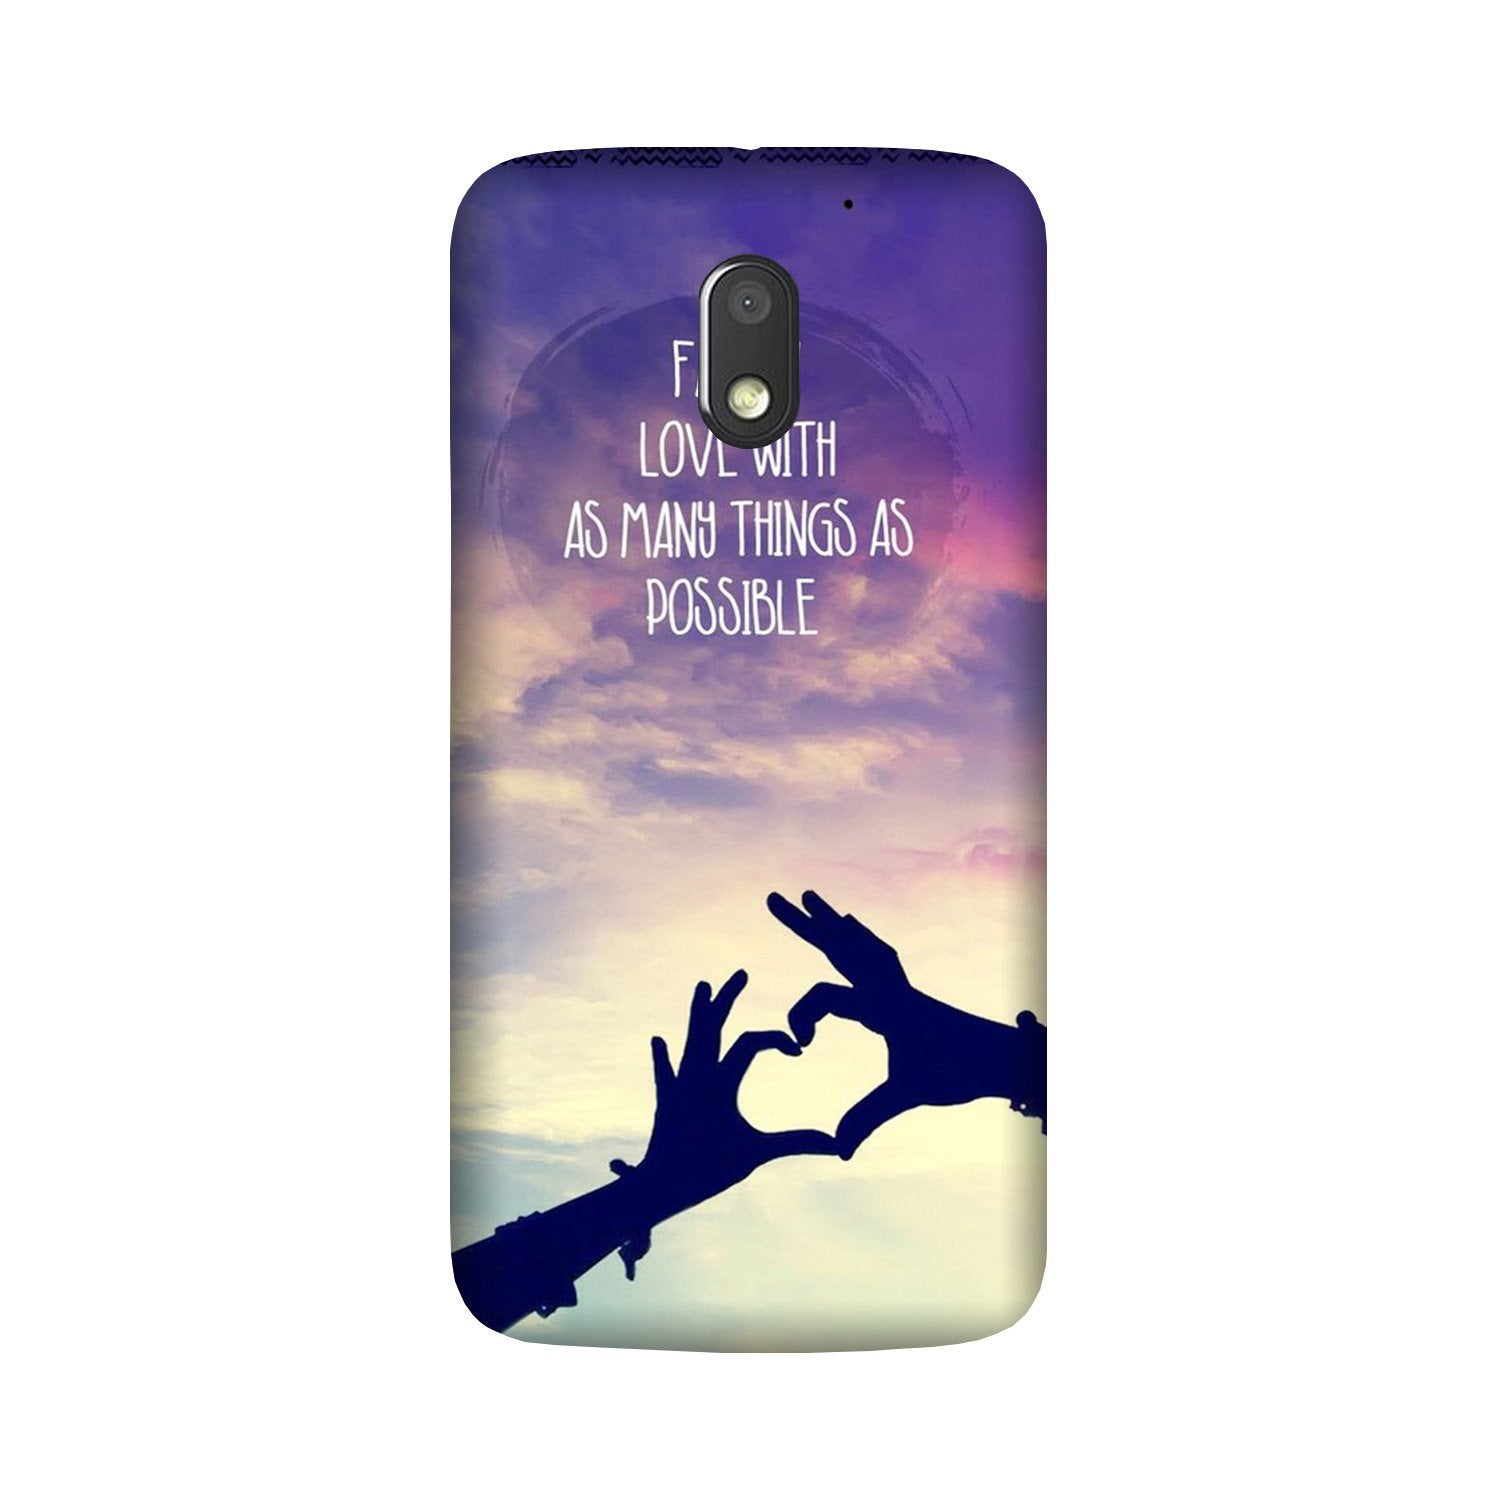 Fall in love Case for Moto G4 Play